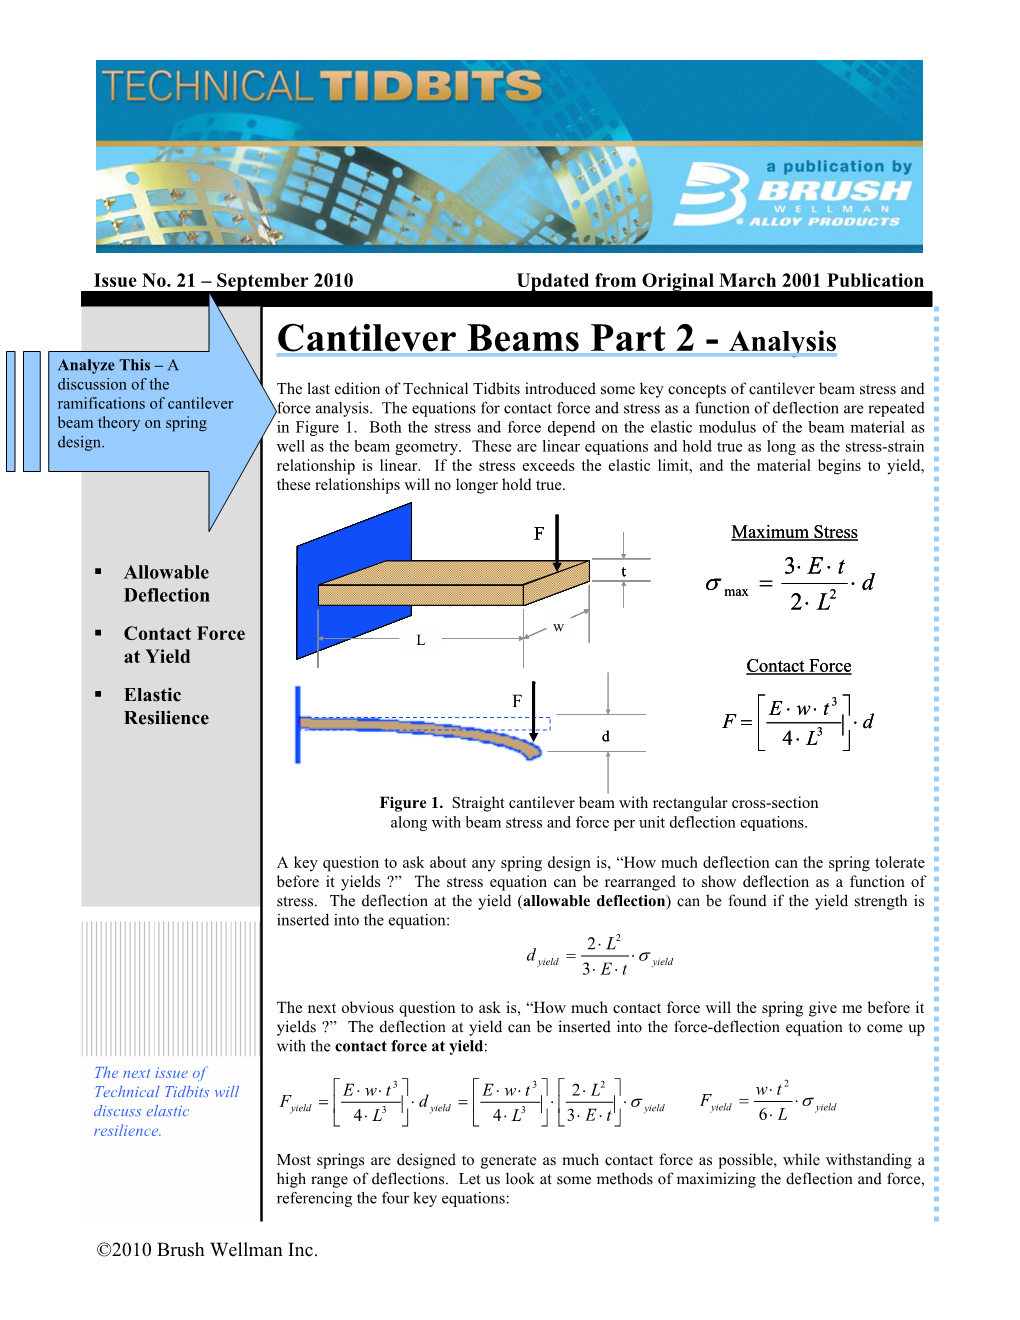 Cantilever Beams Part 2 - Analysis